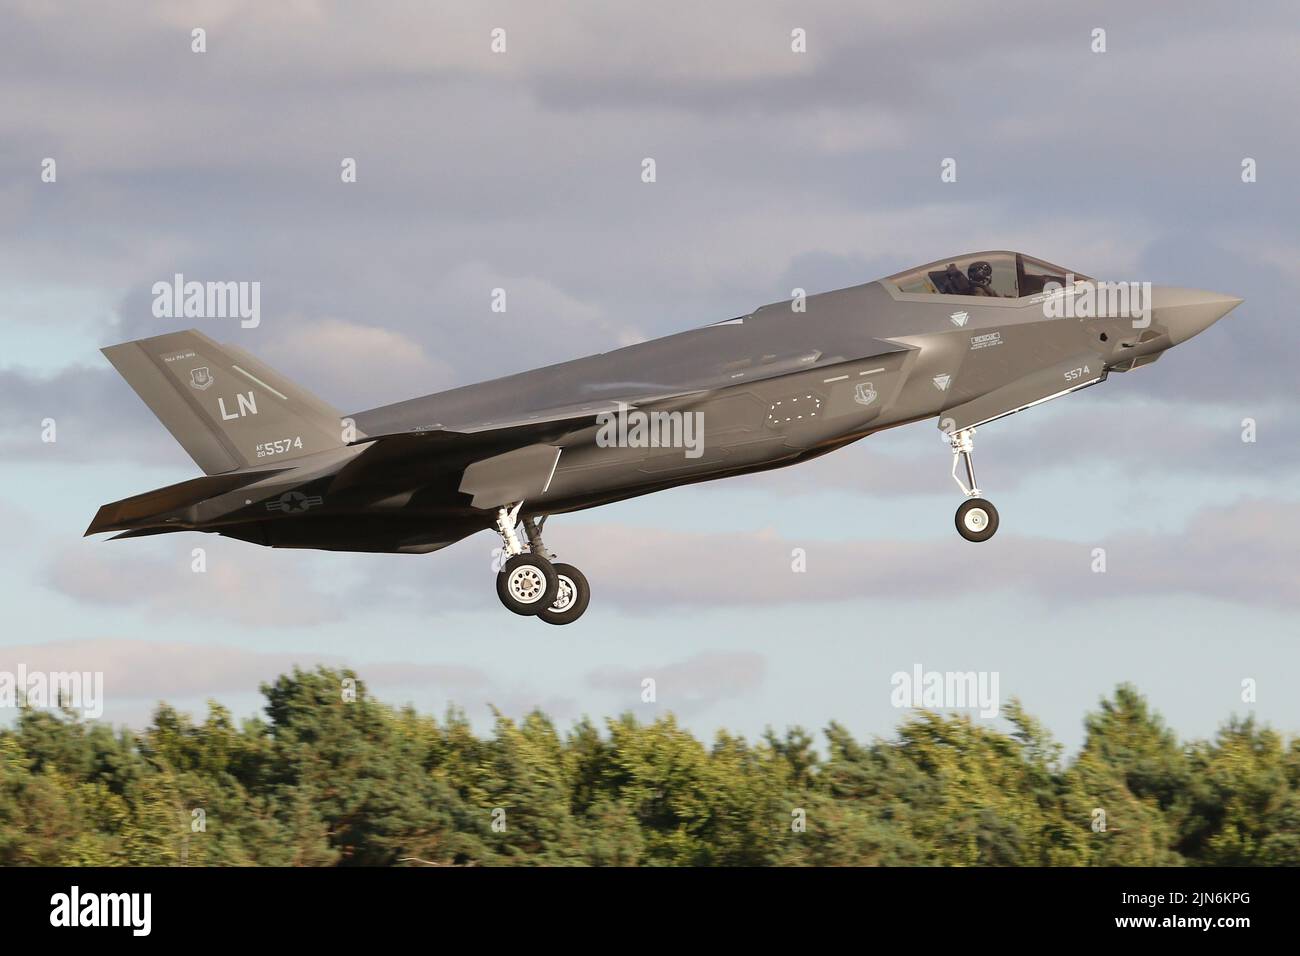 Lockheed Martin F-35A Lightning II strike fighters from the 495th Fighter Squadron returning to RAF Lakenheath, Suffolk after a local evening flight. Stock Photo